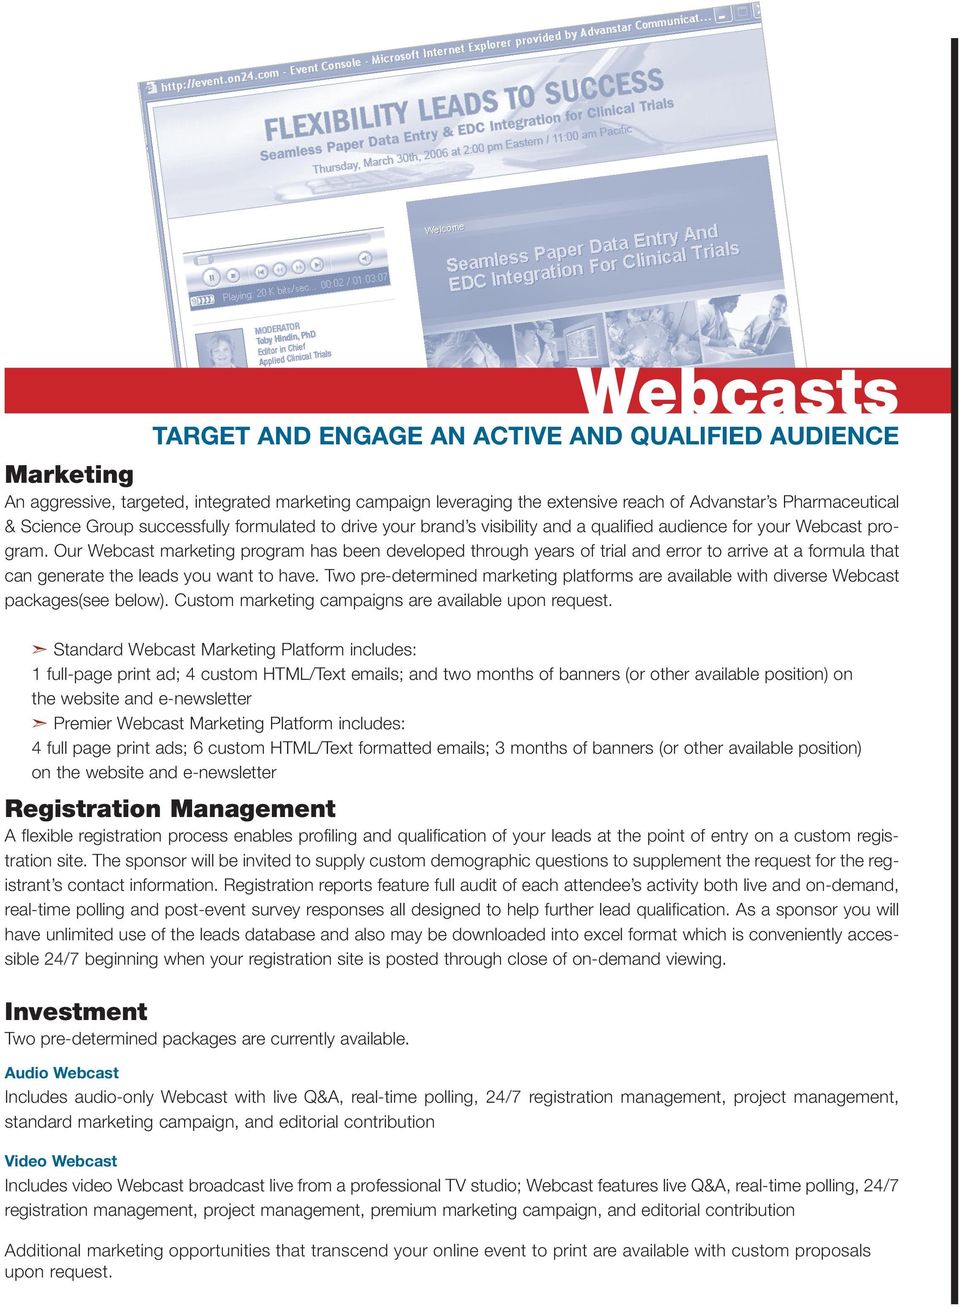 Our Webcast marketing program has been developed through years of trial and error to arrive at a formula that can generate the leads you want to have.